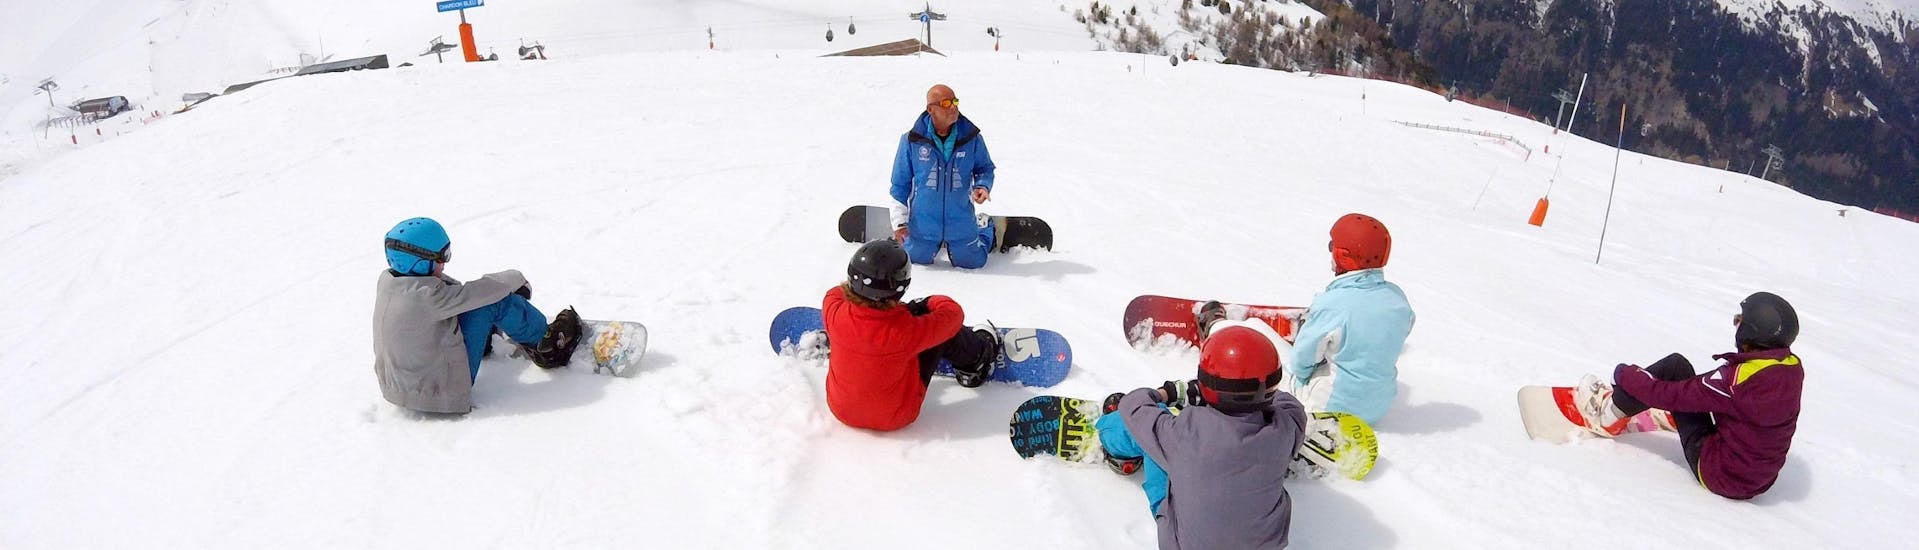 Teenagers are sitting in the snow and are listening to their snowboarding instructor during their Snowboarding Lessons for Kids & Adults - All Levels with the ski school ESI Valfréjus.